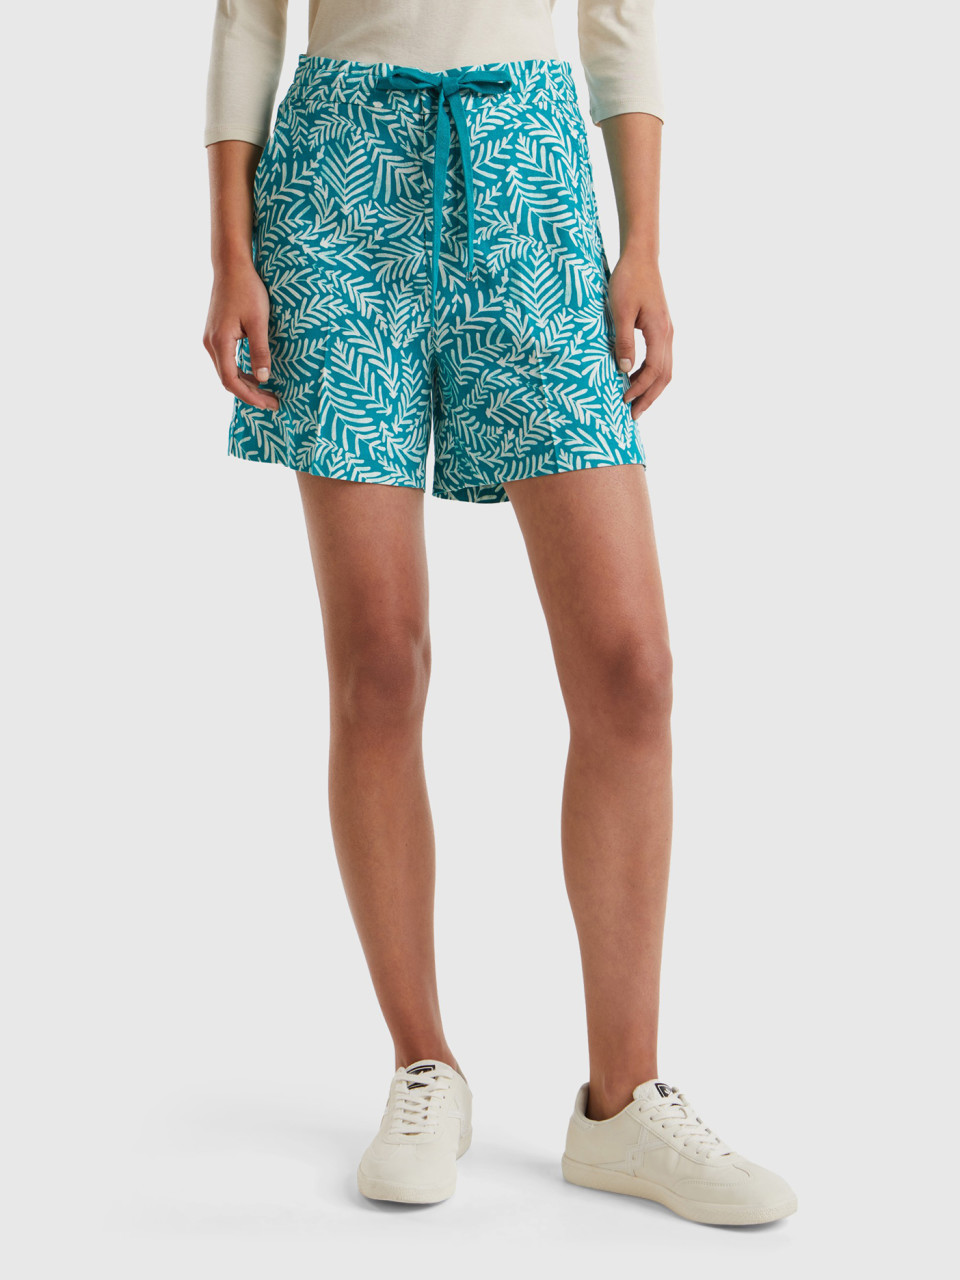 Benetton, Patterned Bermudas In Sustainable Viscose, Teal, Women